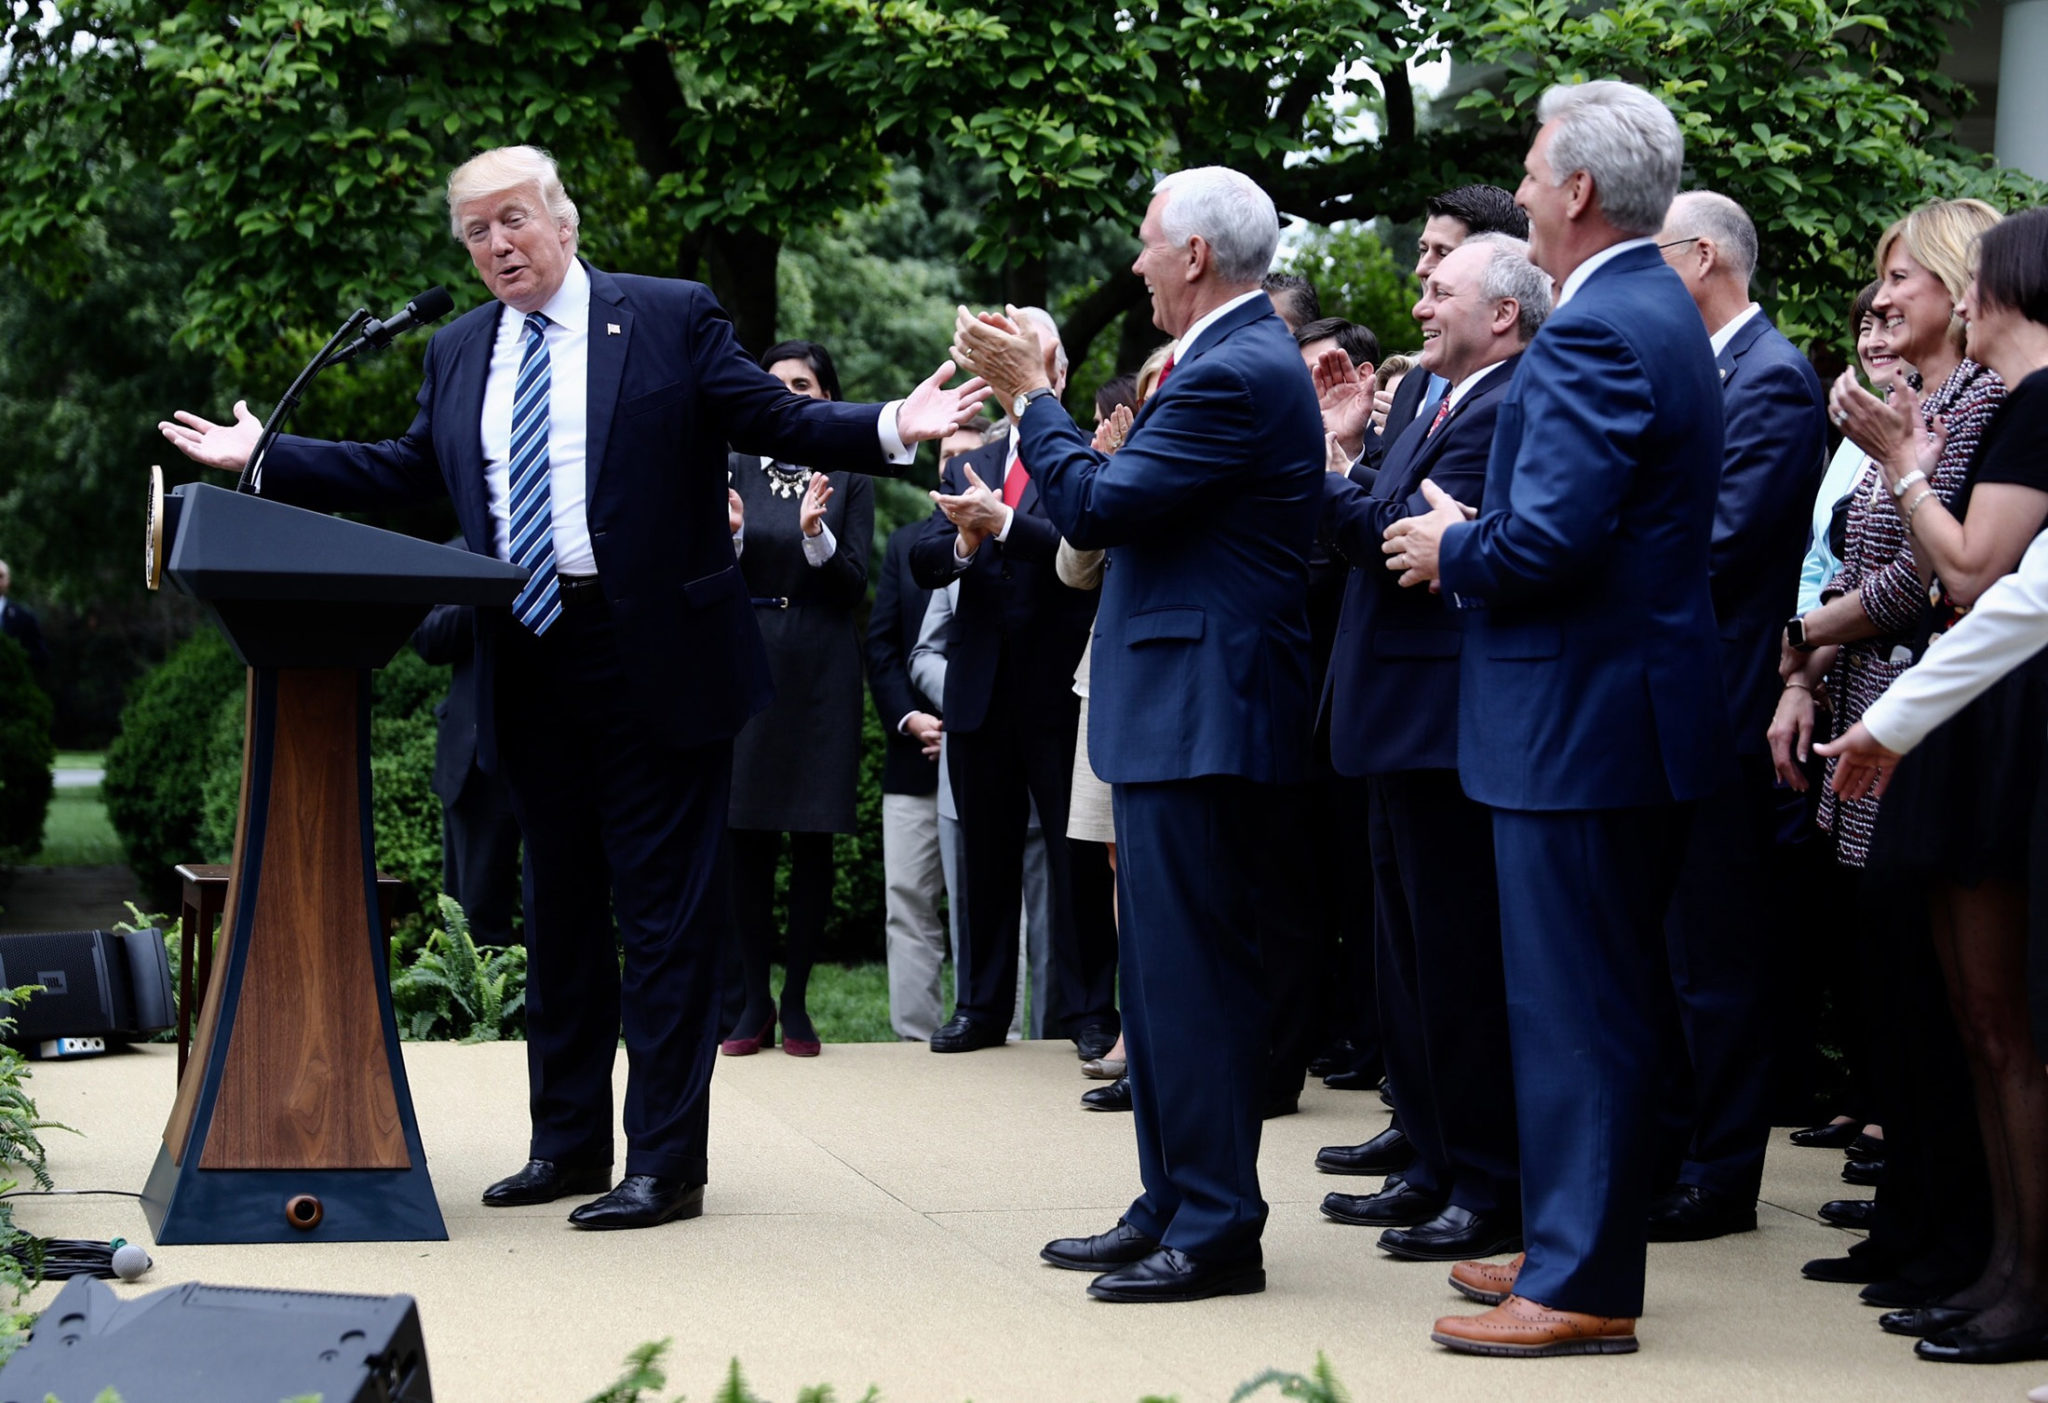 U.S. President Donald Trump, left, speaks as U.S. Vice President Mike Pence, center, applauds during a press conference in the Rose Garden of the White House in Washington, D.C., U.S., on Thursday. House Republicans mustered just enough votes to pass their health-care bill Thursday, salvaging what at times appeared to be a doomed mission to repeal and partially replace Obamacare under intense pressure from Trump to produce legislative accomplishments. / BLOOMBERG / ANDREW HARRER